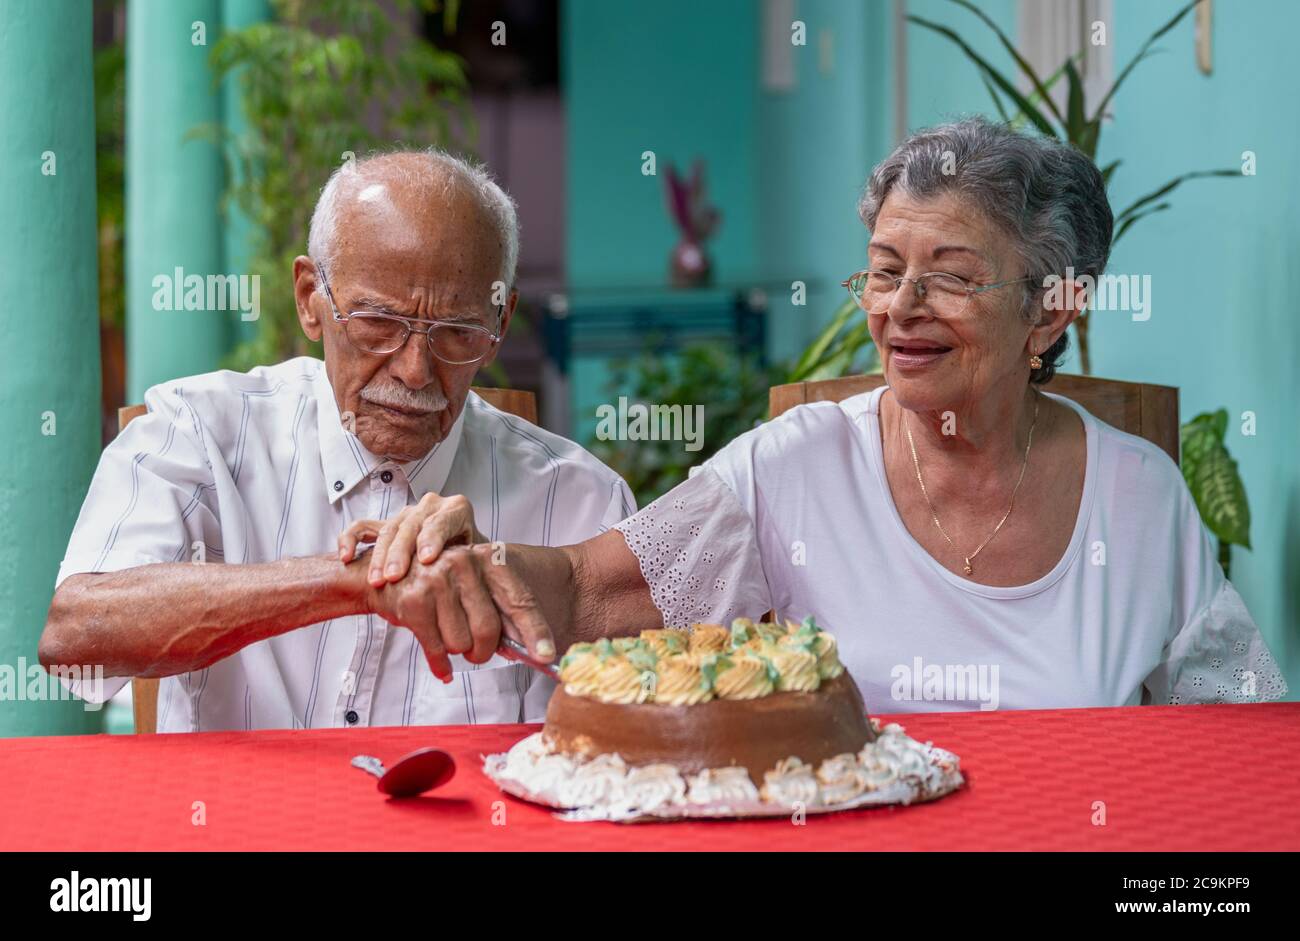 Smiling elderly couple cutting a cake helping each other Stock Photo